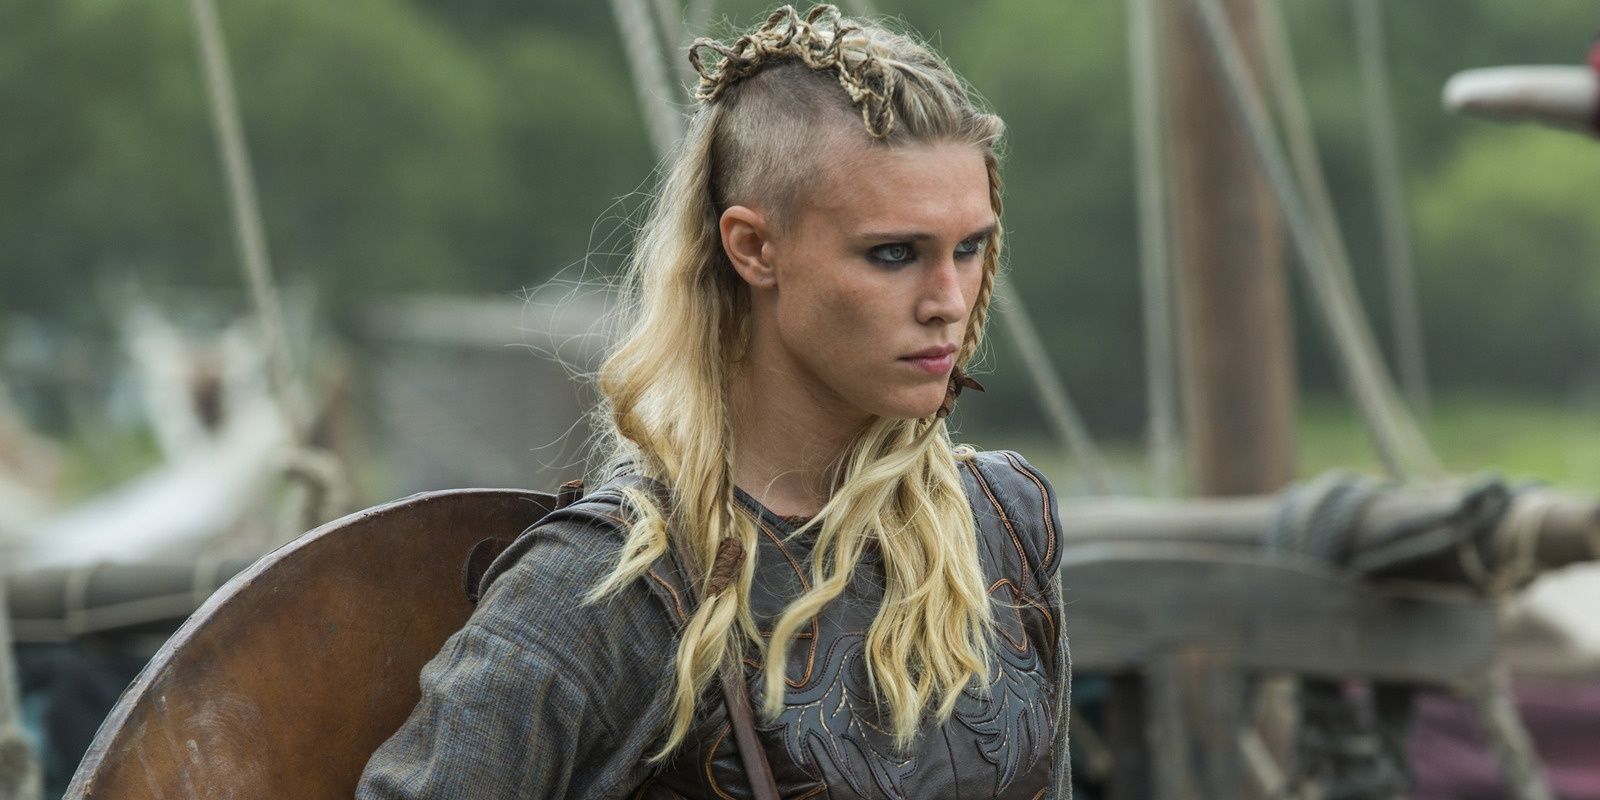 Porunn (Gaia Weiss) with a buzz cut braid hairstyle in &quot;Vikings.&quot;